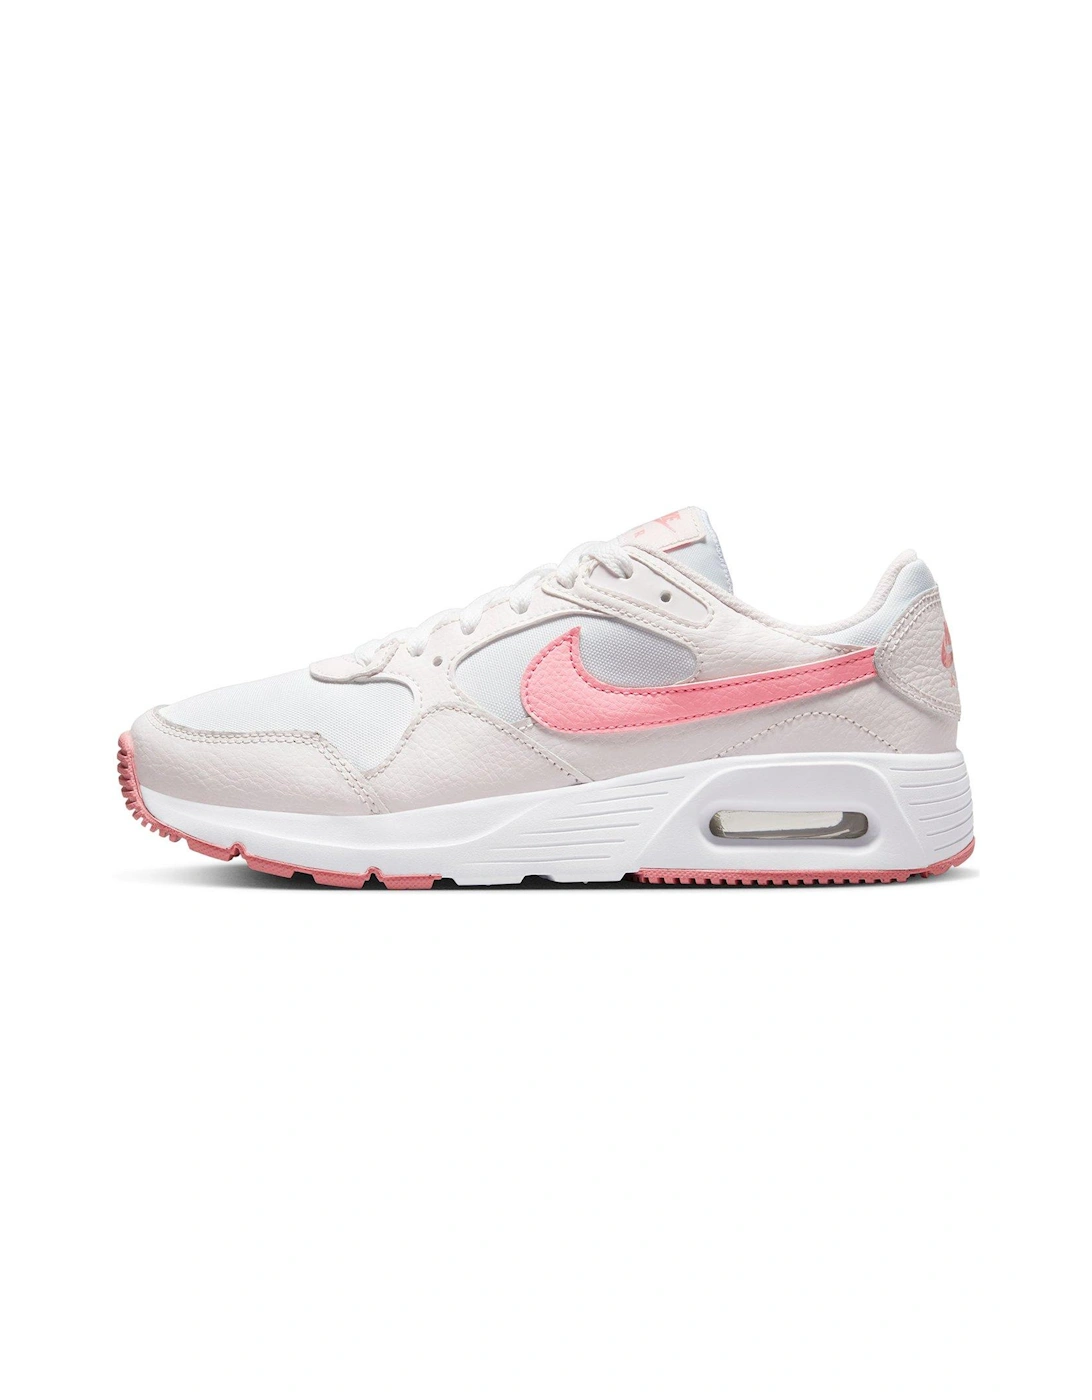 Air Max SC - Pink/White, 3 of 2